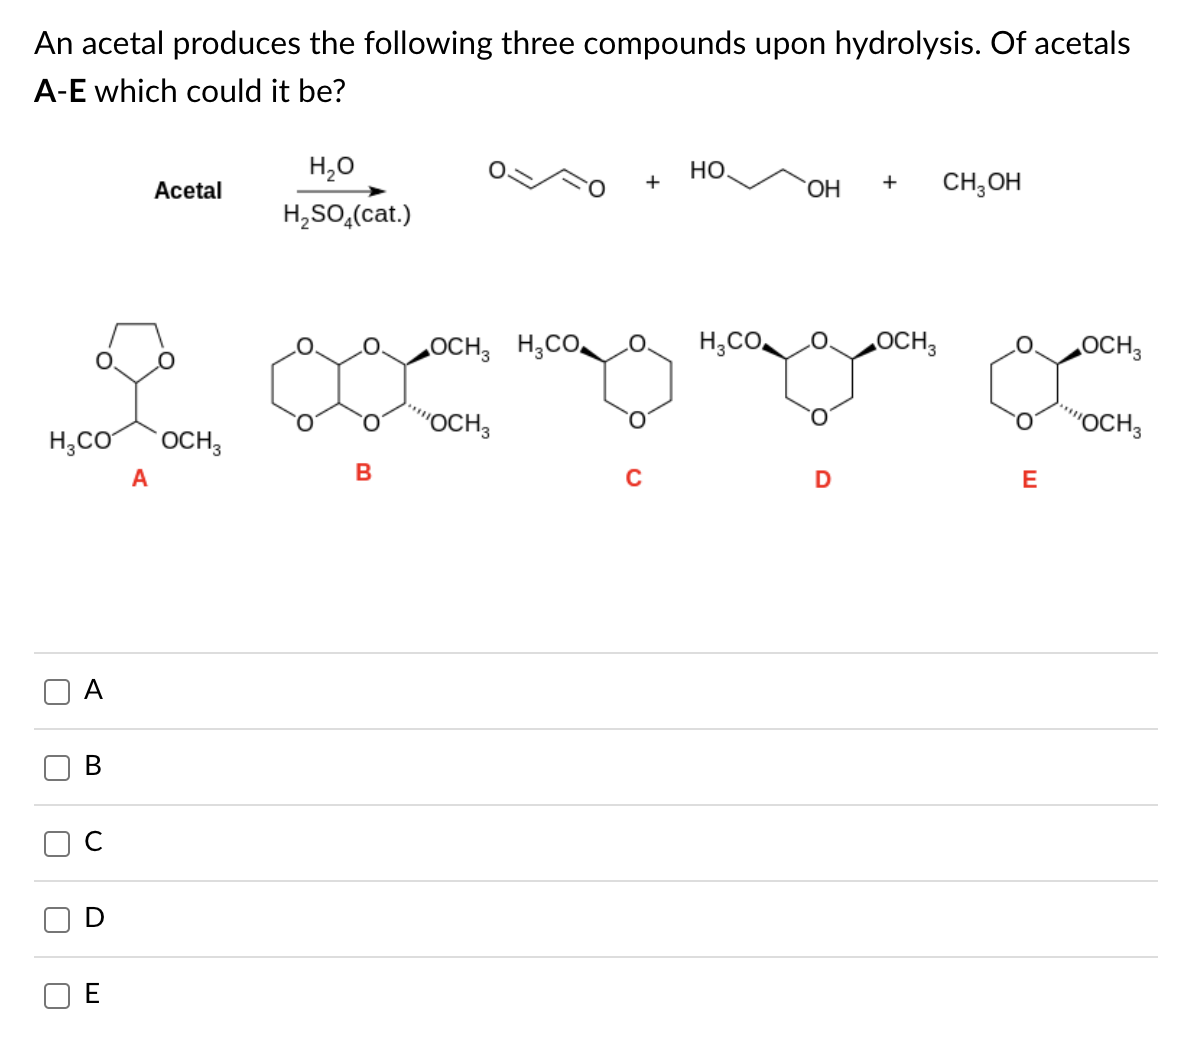 An acetal produces the following three compounds upon hydrolysis. Of acetals
A-E which could it be?
H3CO OCH3
П
A
B
U
D
Acetal
A
H2O
H₂SO4(cat.)
замен поста
"OCH3
В
+
HO.
H₂CO
ОН
D
+
OCH3
CH3OH
E
OCH3
"OCH3